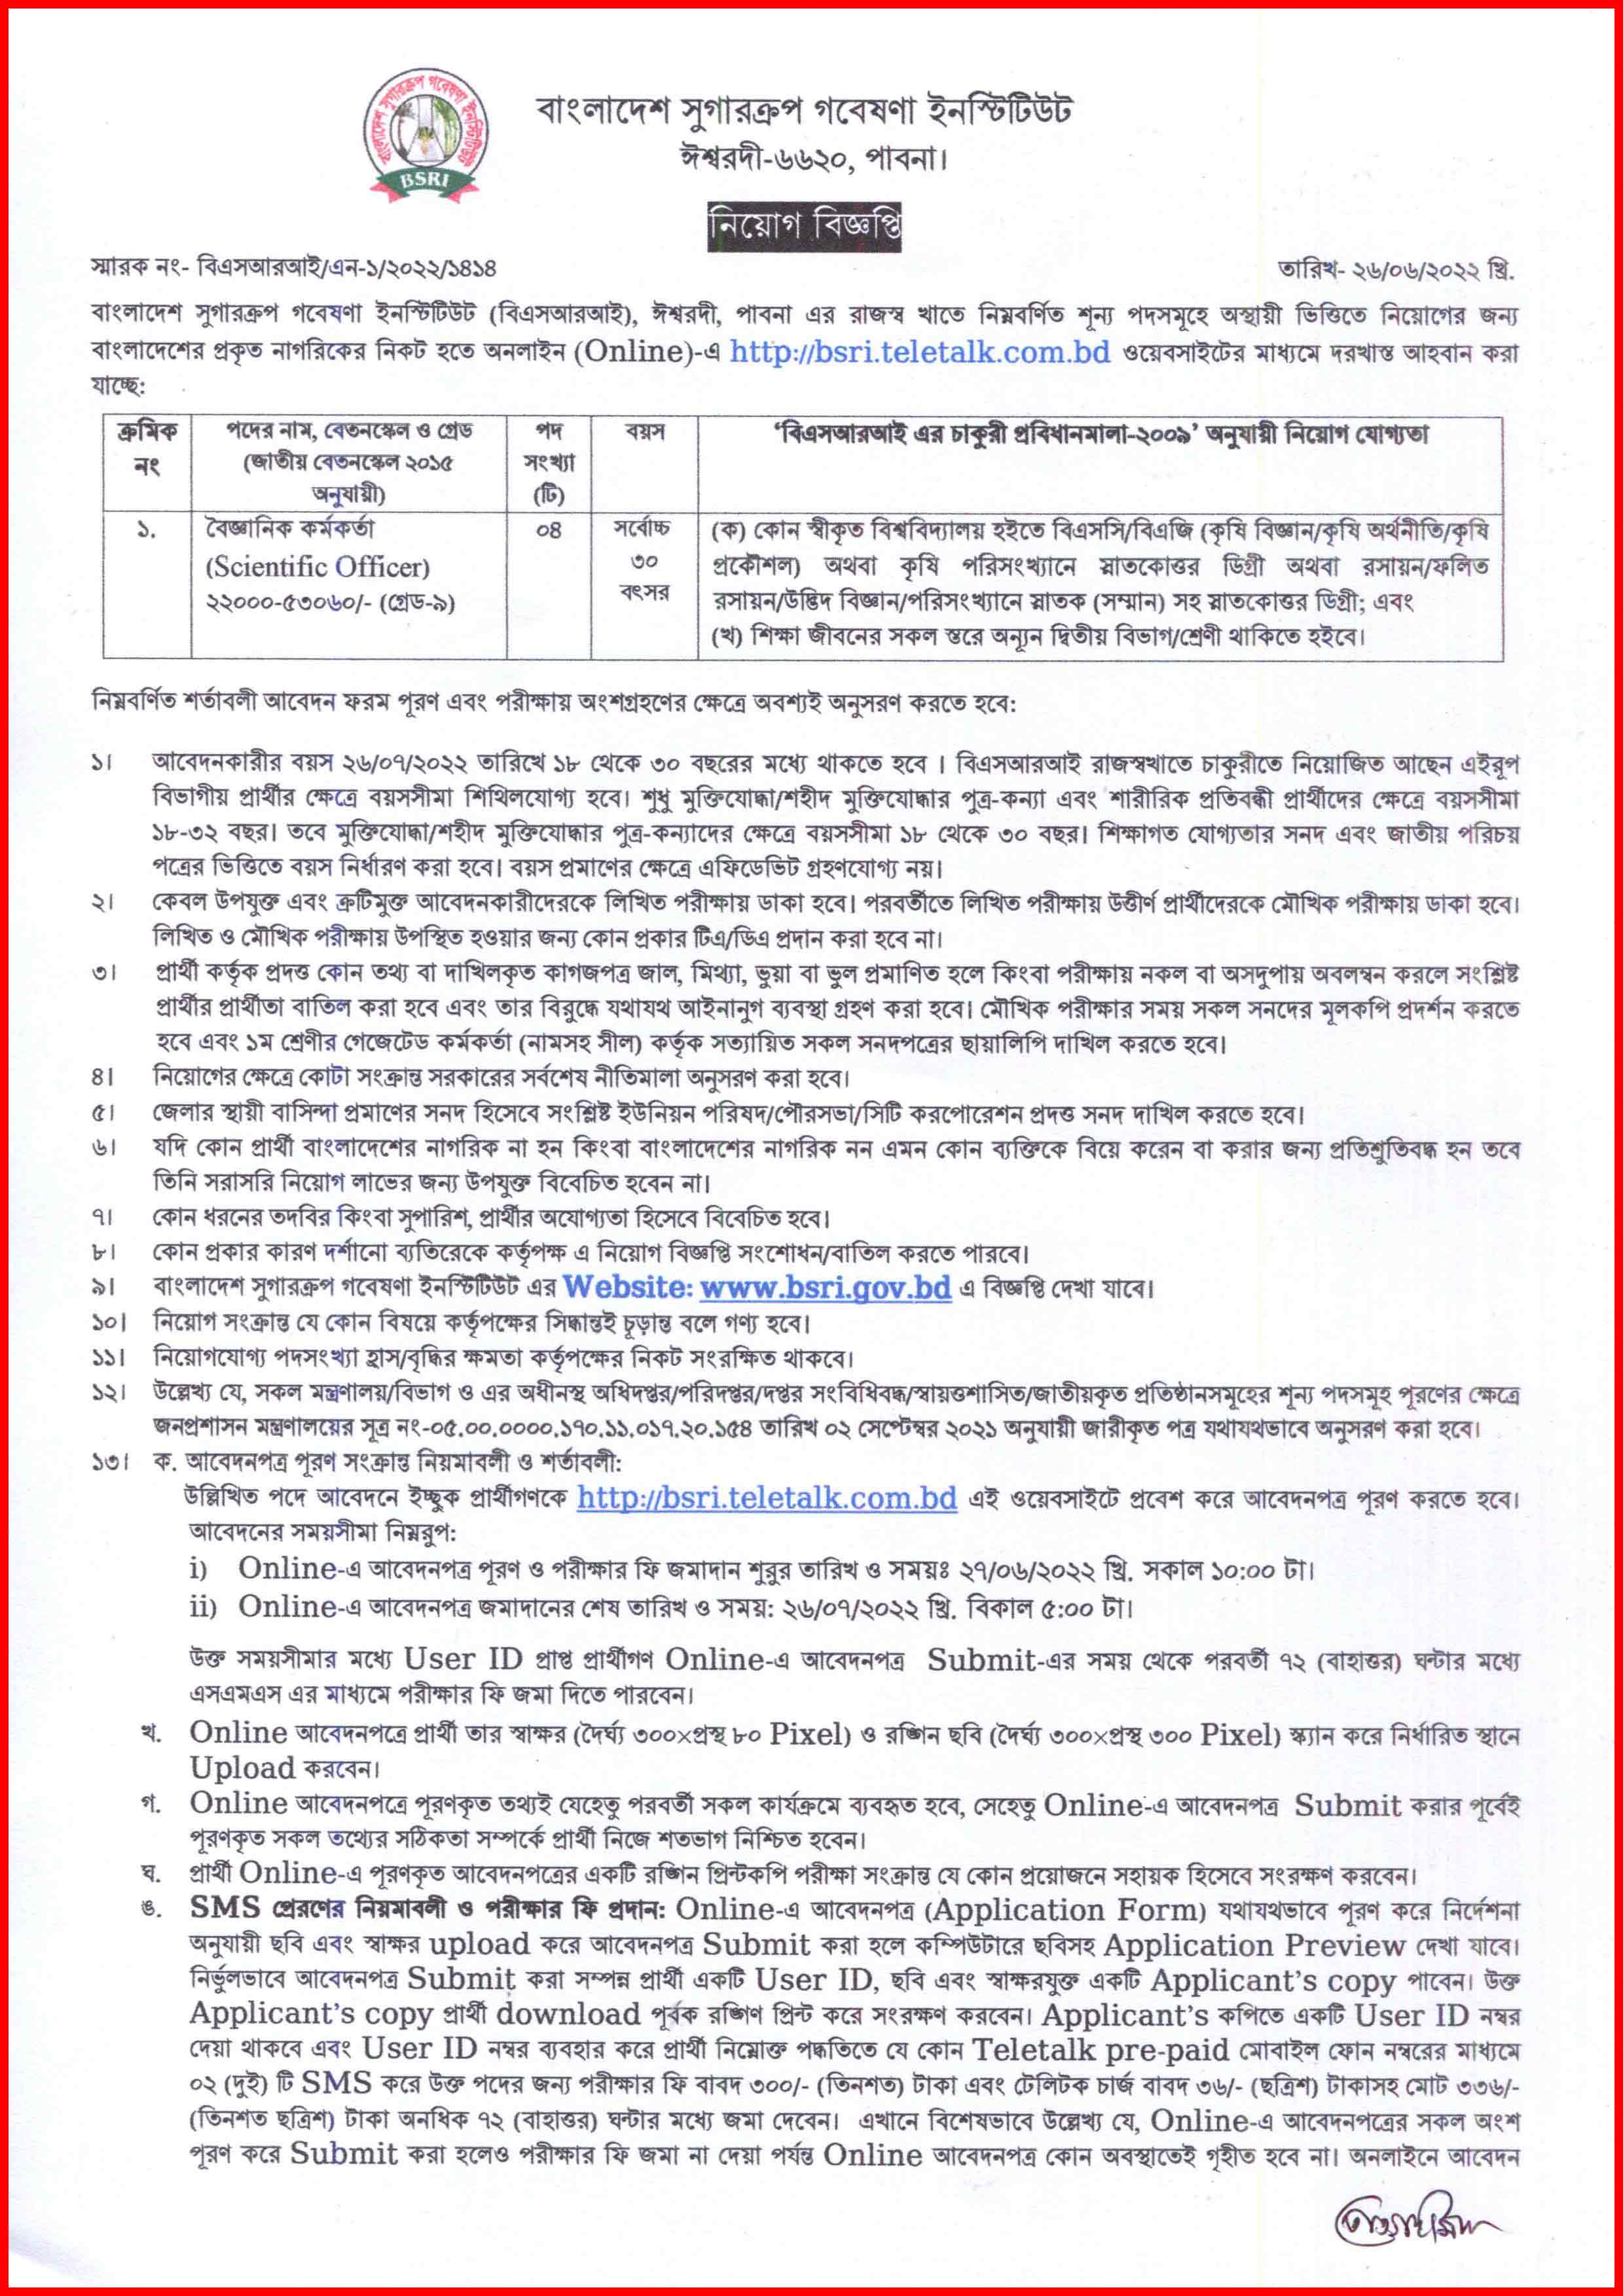 Bangladesh-sugergroup-research-institute-Scientific Officer